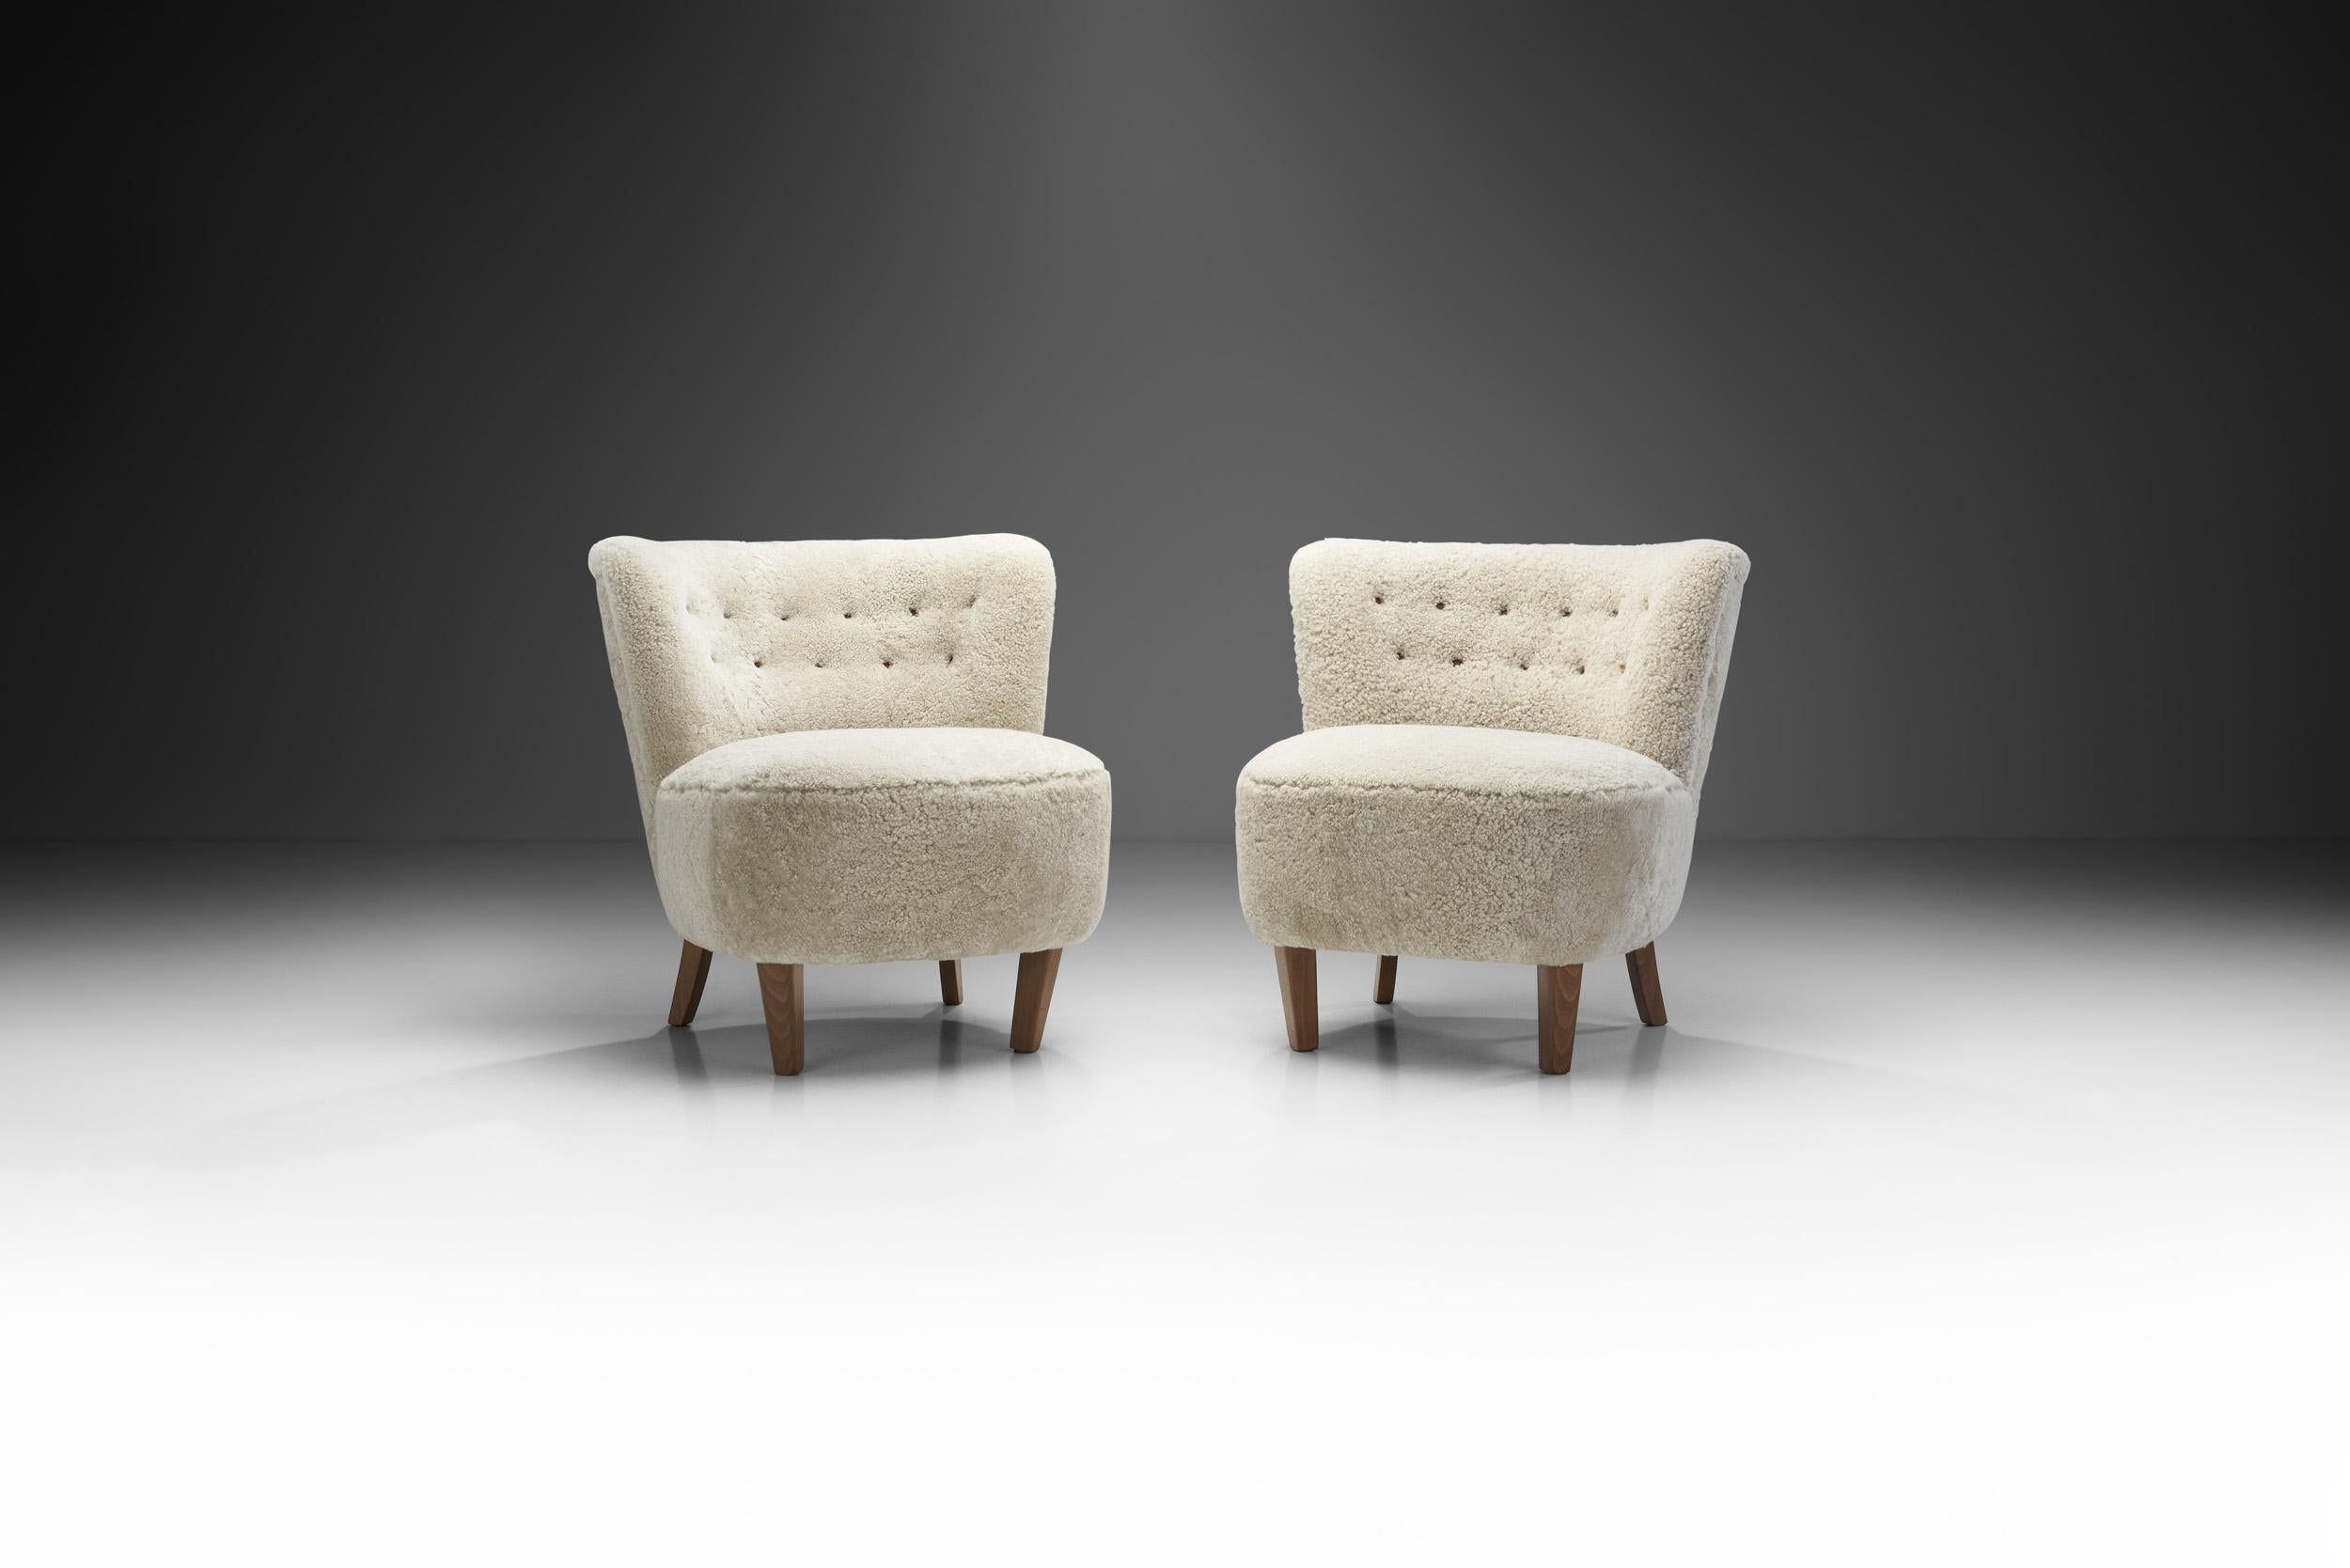 “Danish Modern” is a recognized term around the world, standing for the characteristic style of Danish design created during the 20th century. As these lounge chairs show, furniture created in this period is characterized by clarity in design and